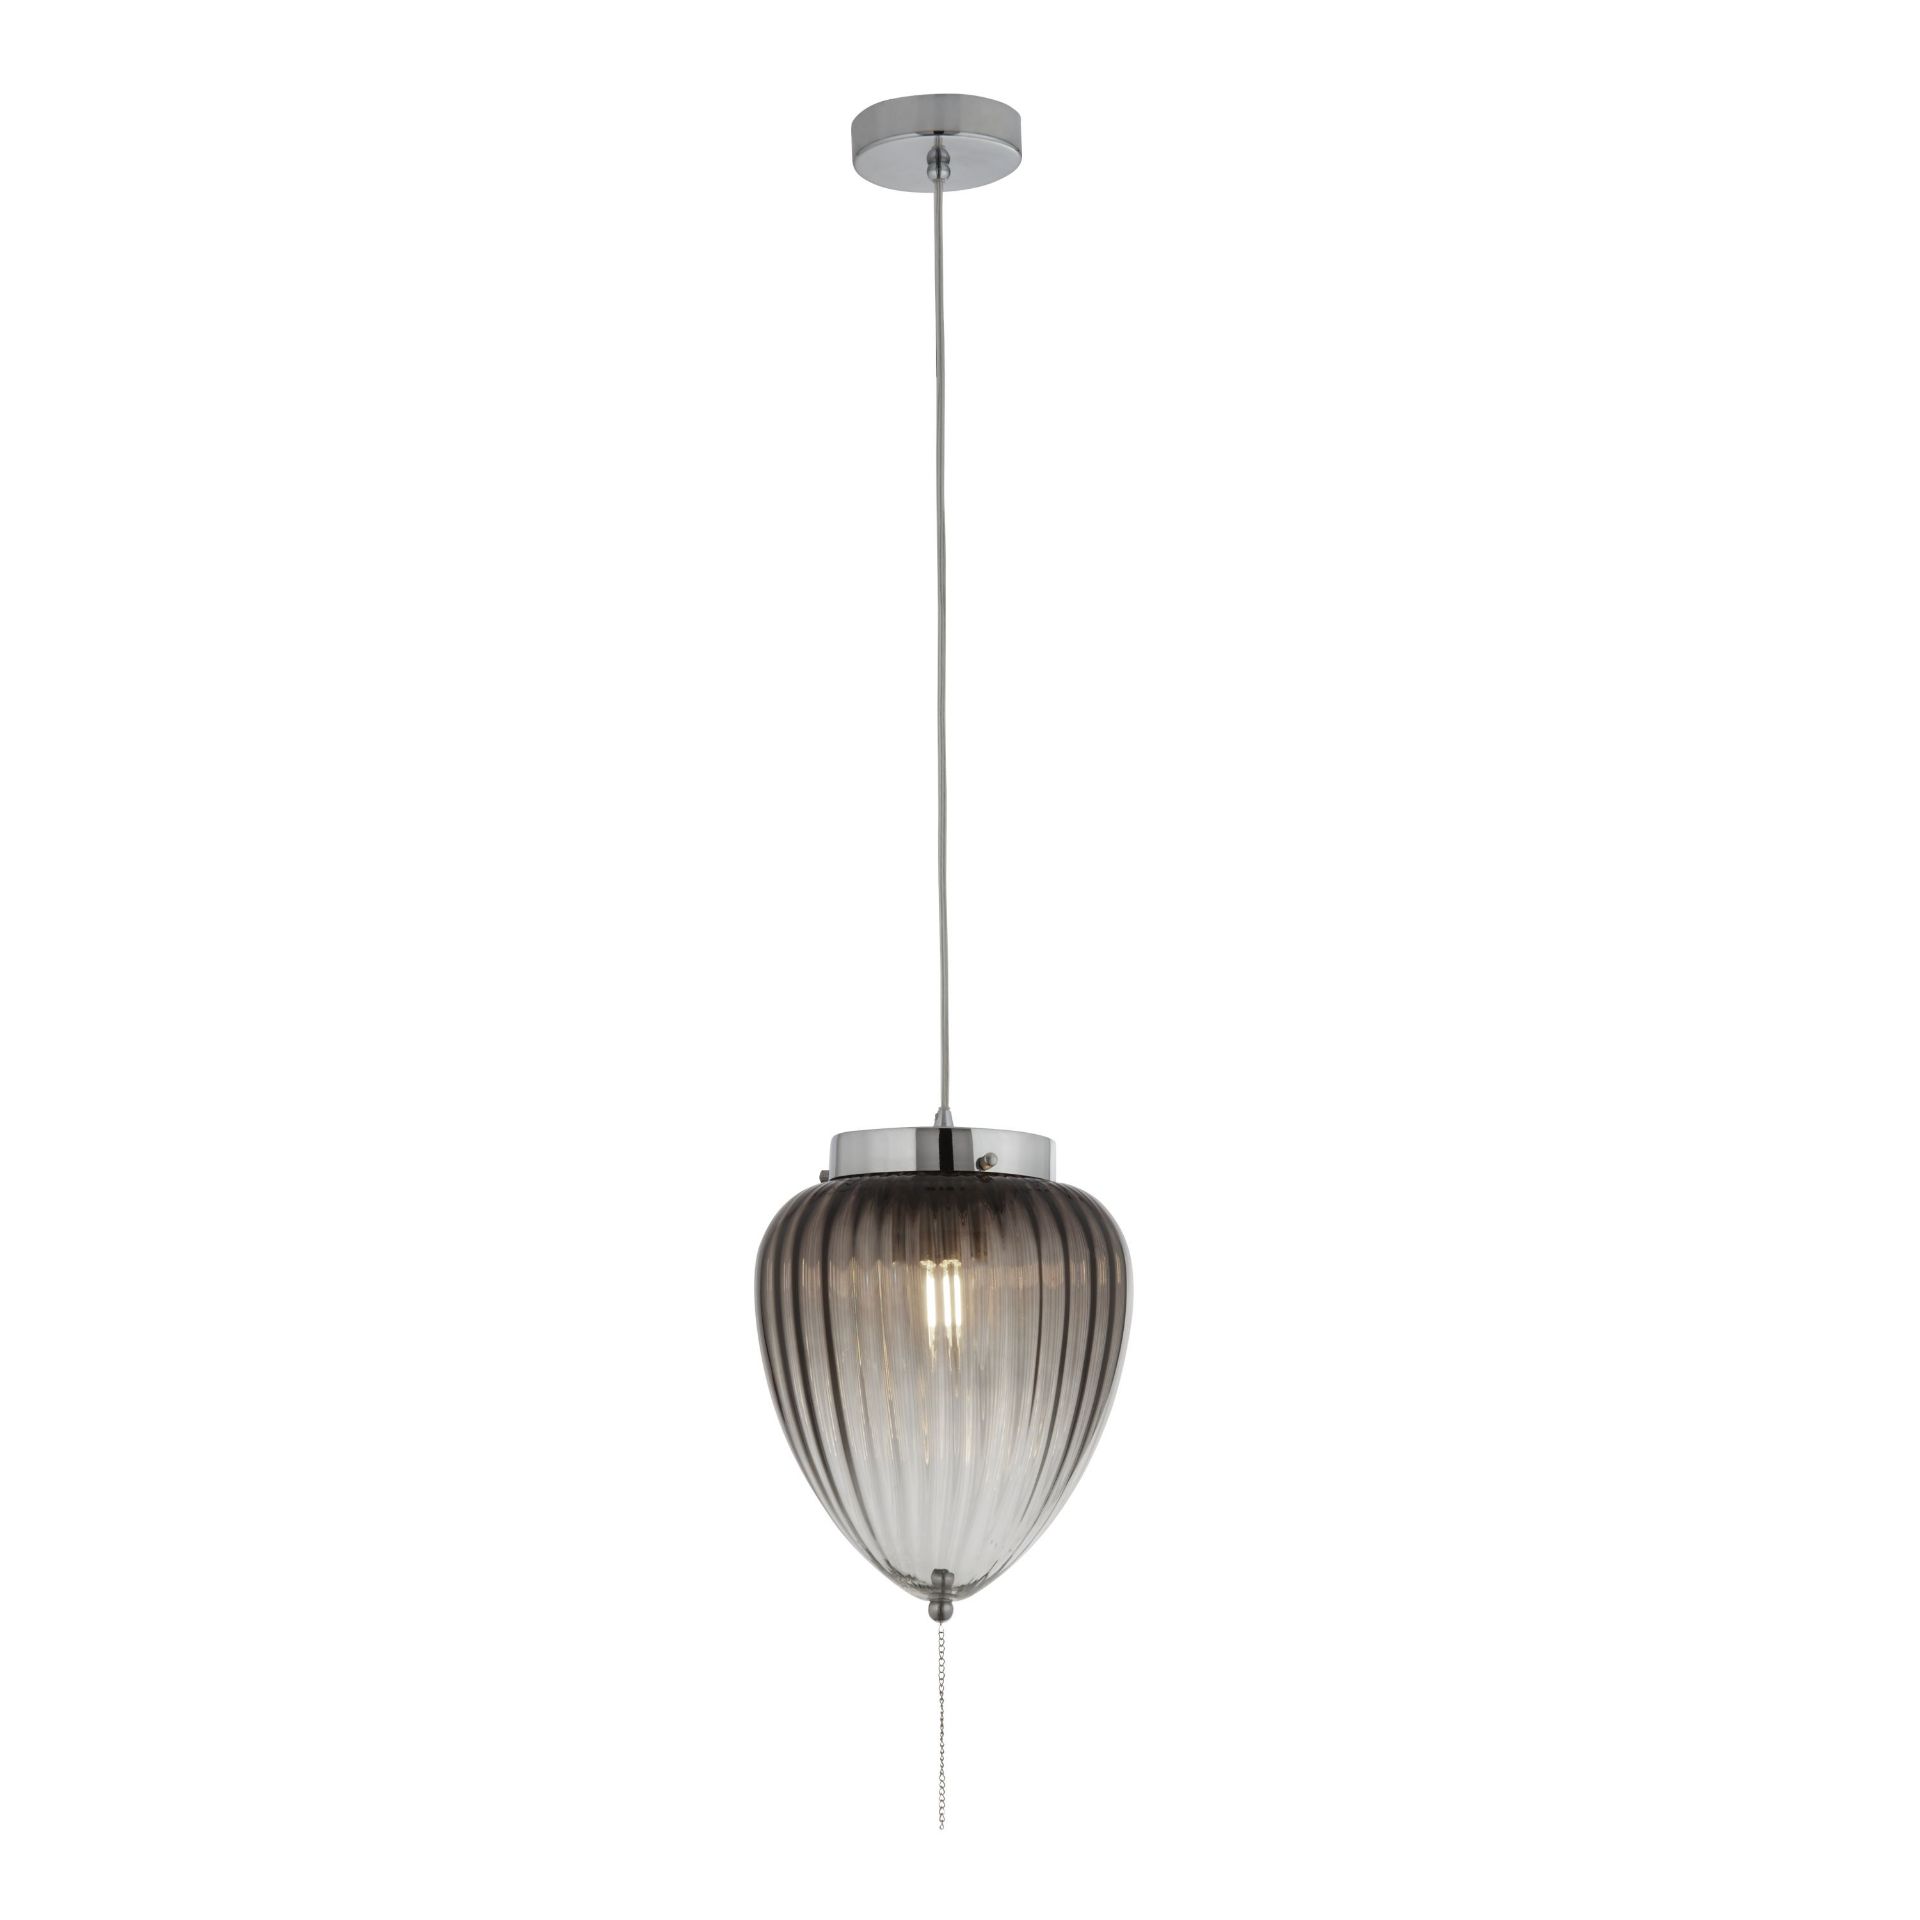 BRAND NEW HEIGHT ADJUSTABLE SMOKED OMBRE CEILING PENDANT, 60w.